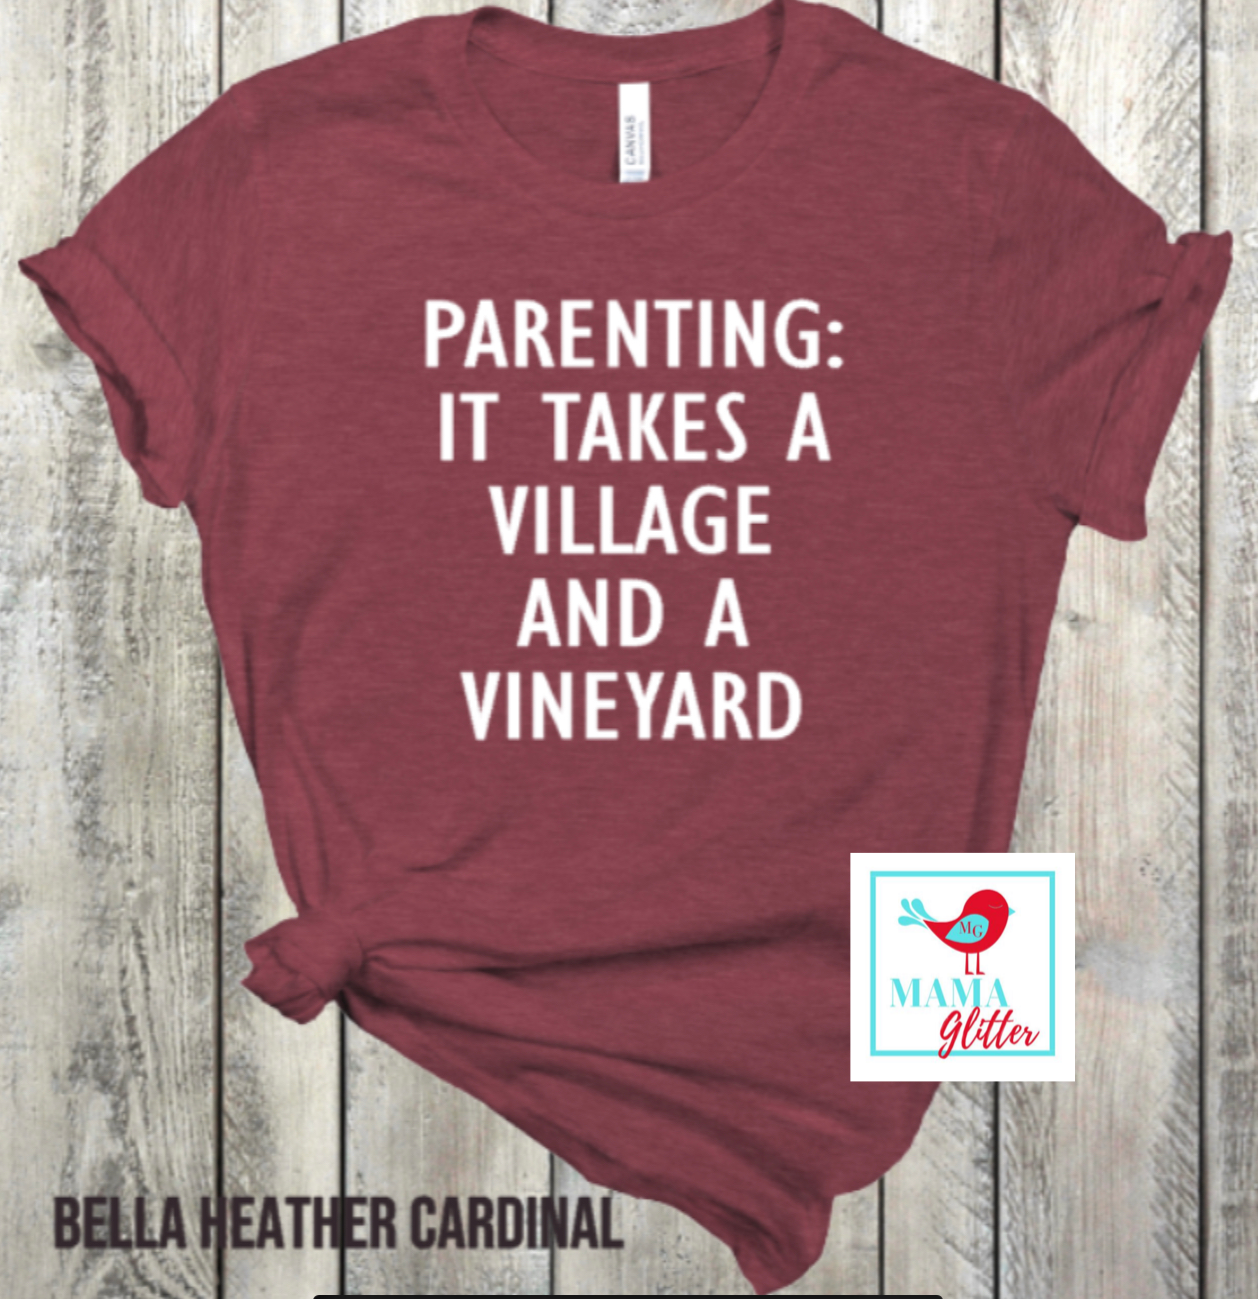 Parenting : It takes a Village and a Vineyard